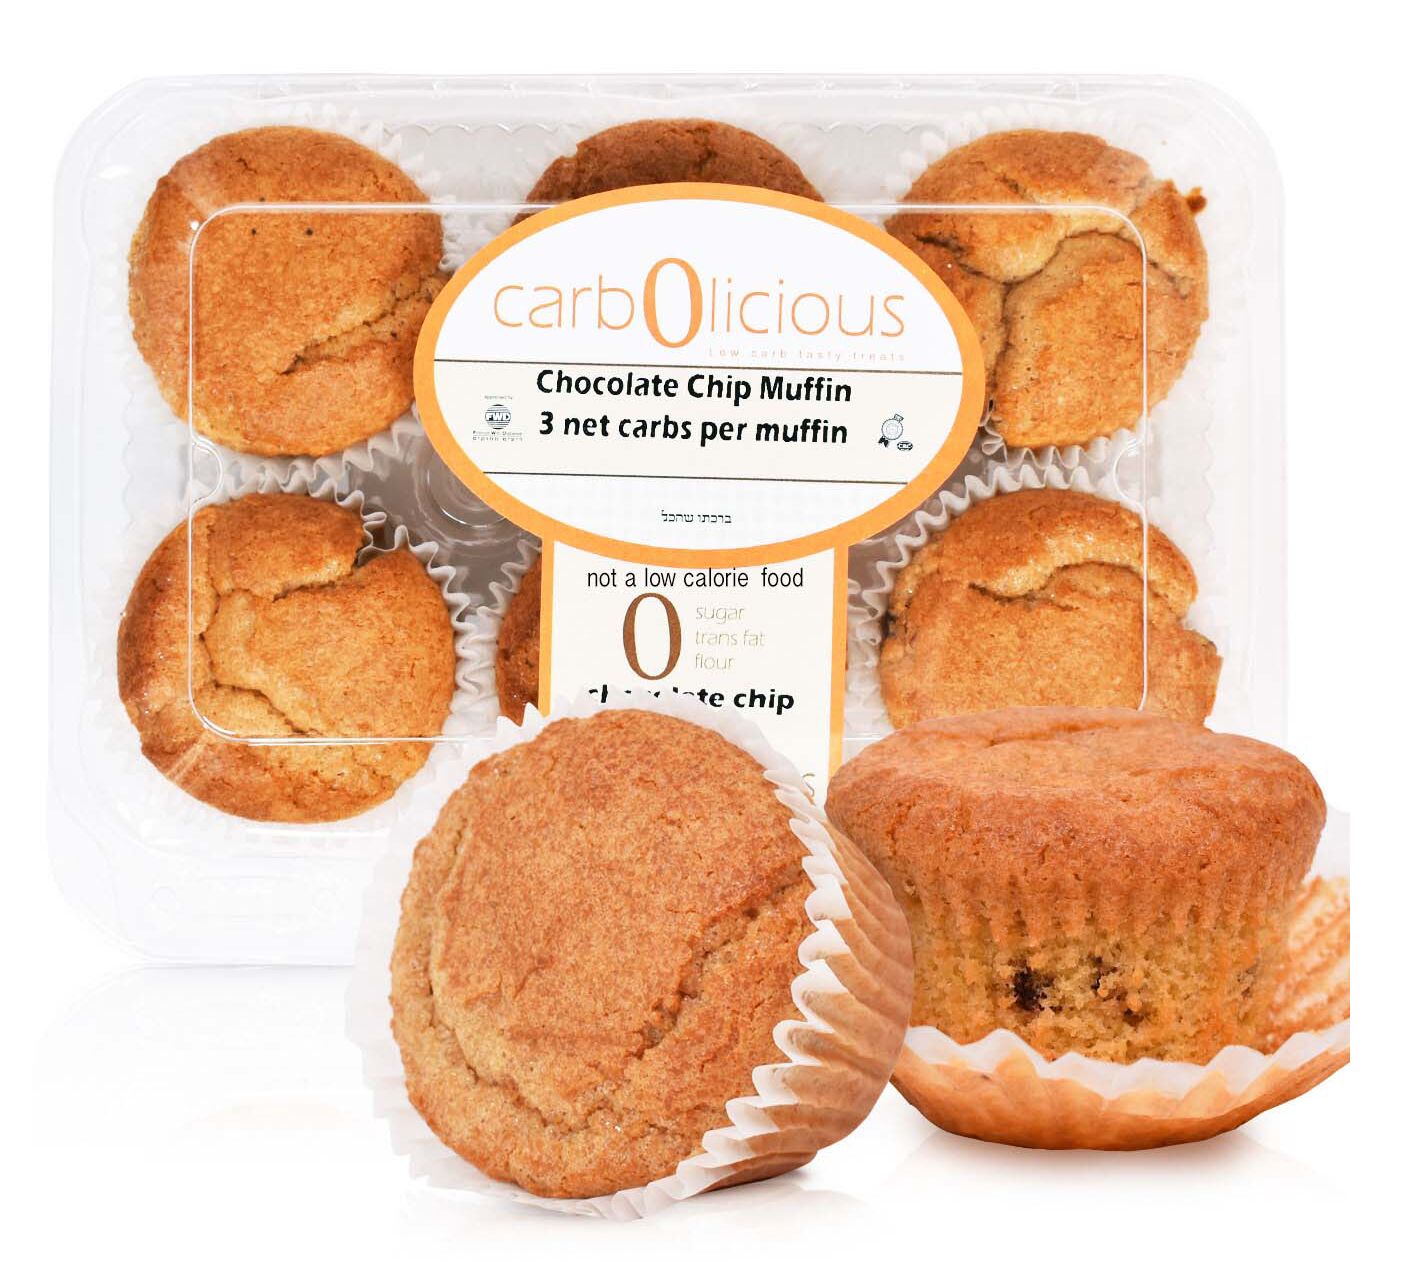 #Flavor_Chocolate Chip #Size_One Pack (6 Muffins)